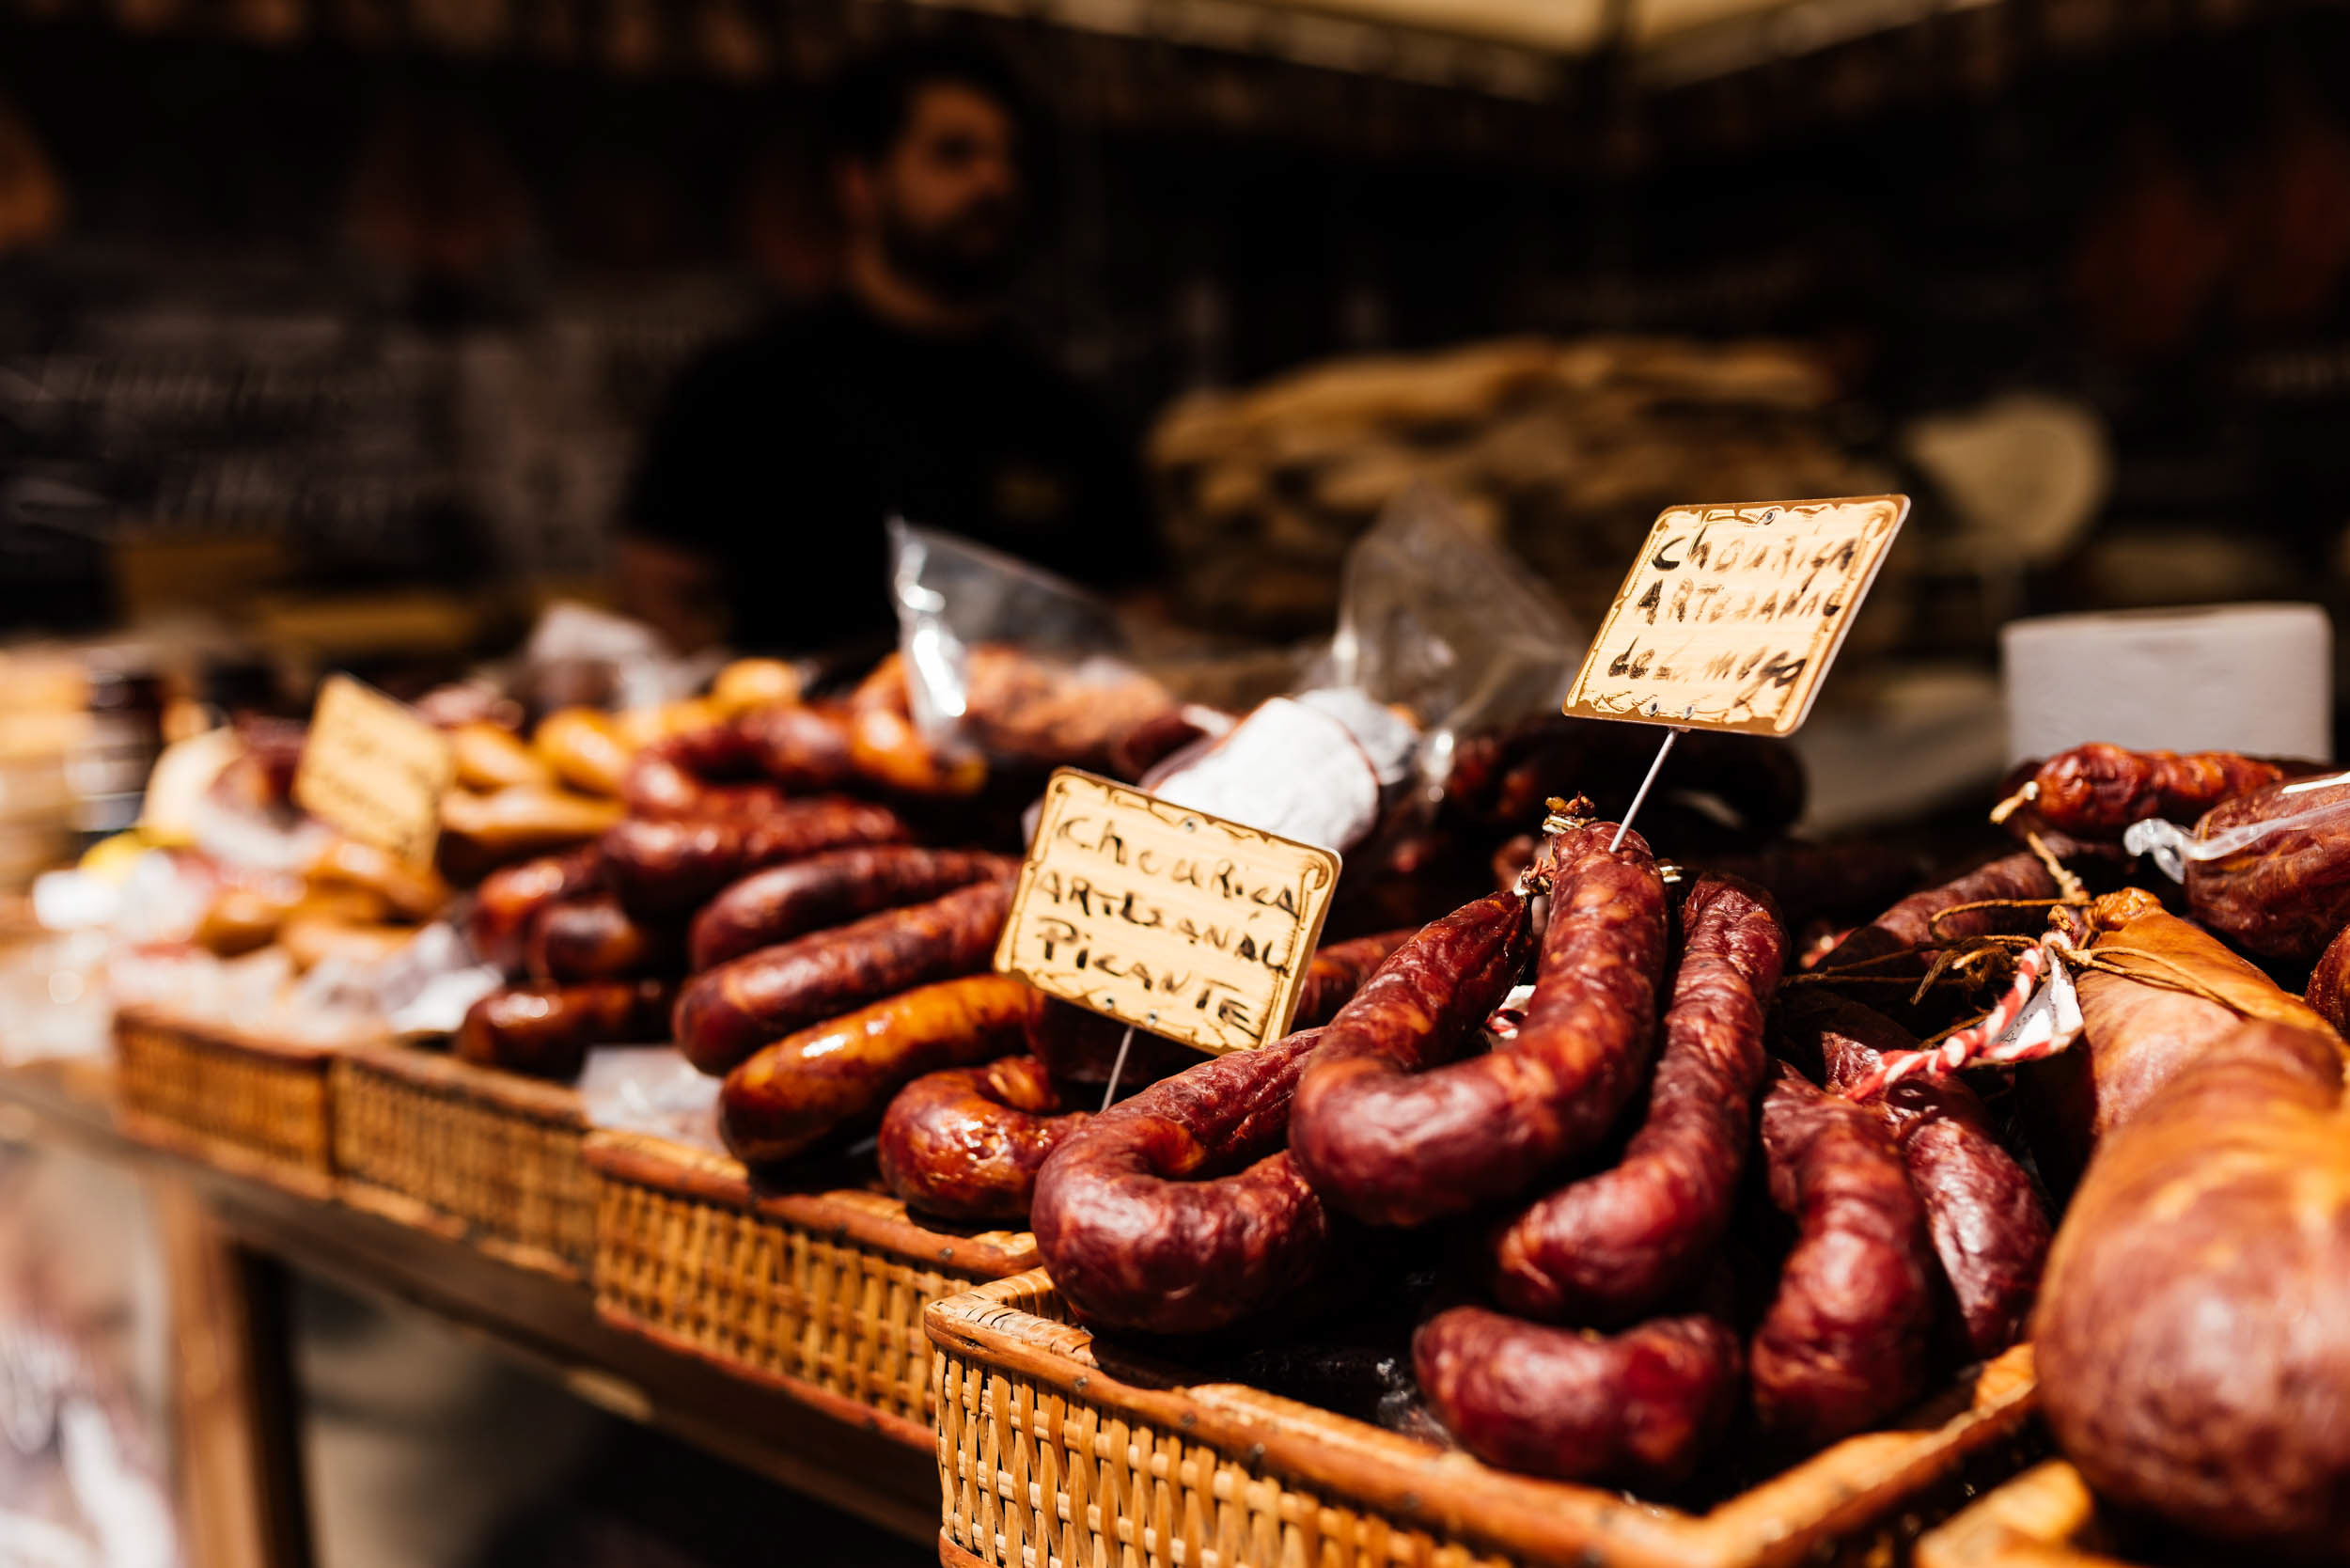 meat-chorizo-sausage-stall-market-produce-local-traditional-cuisine-lisbon-portugal